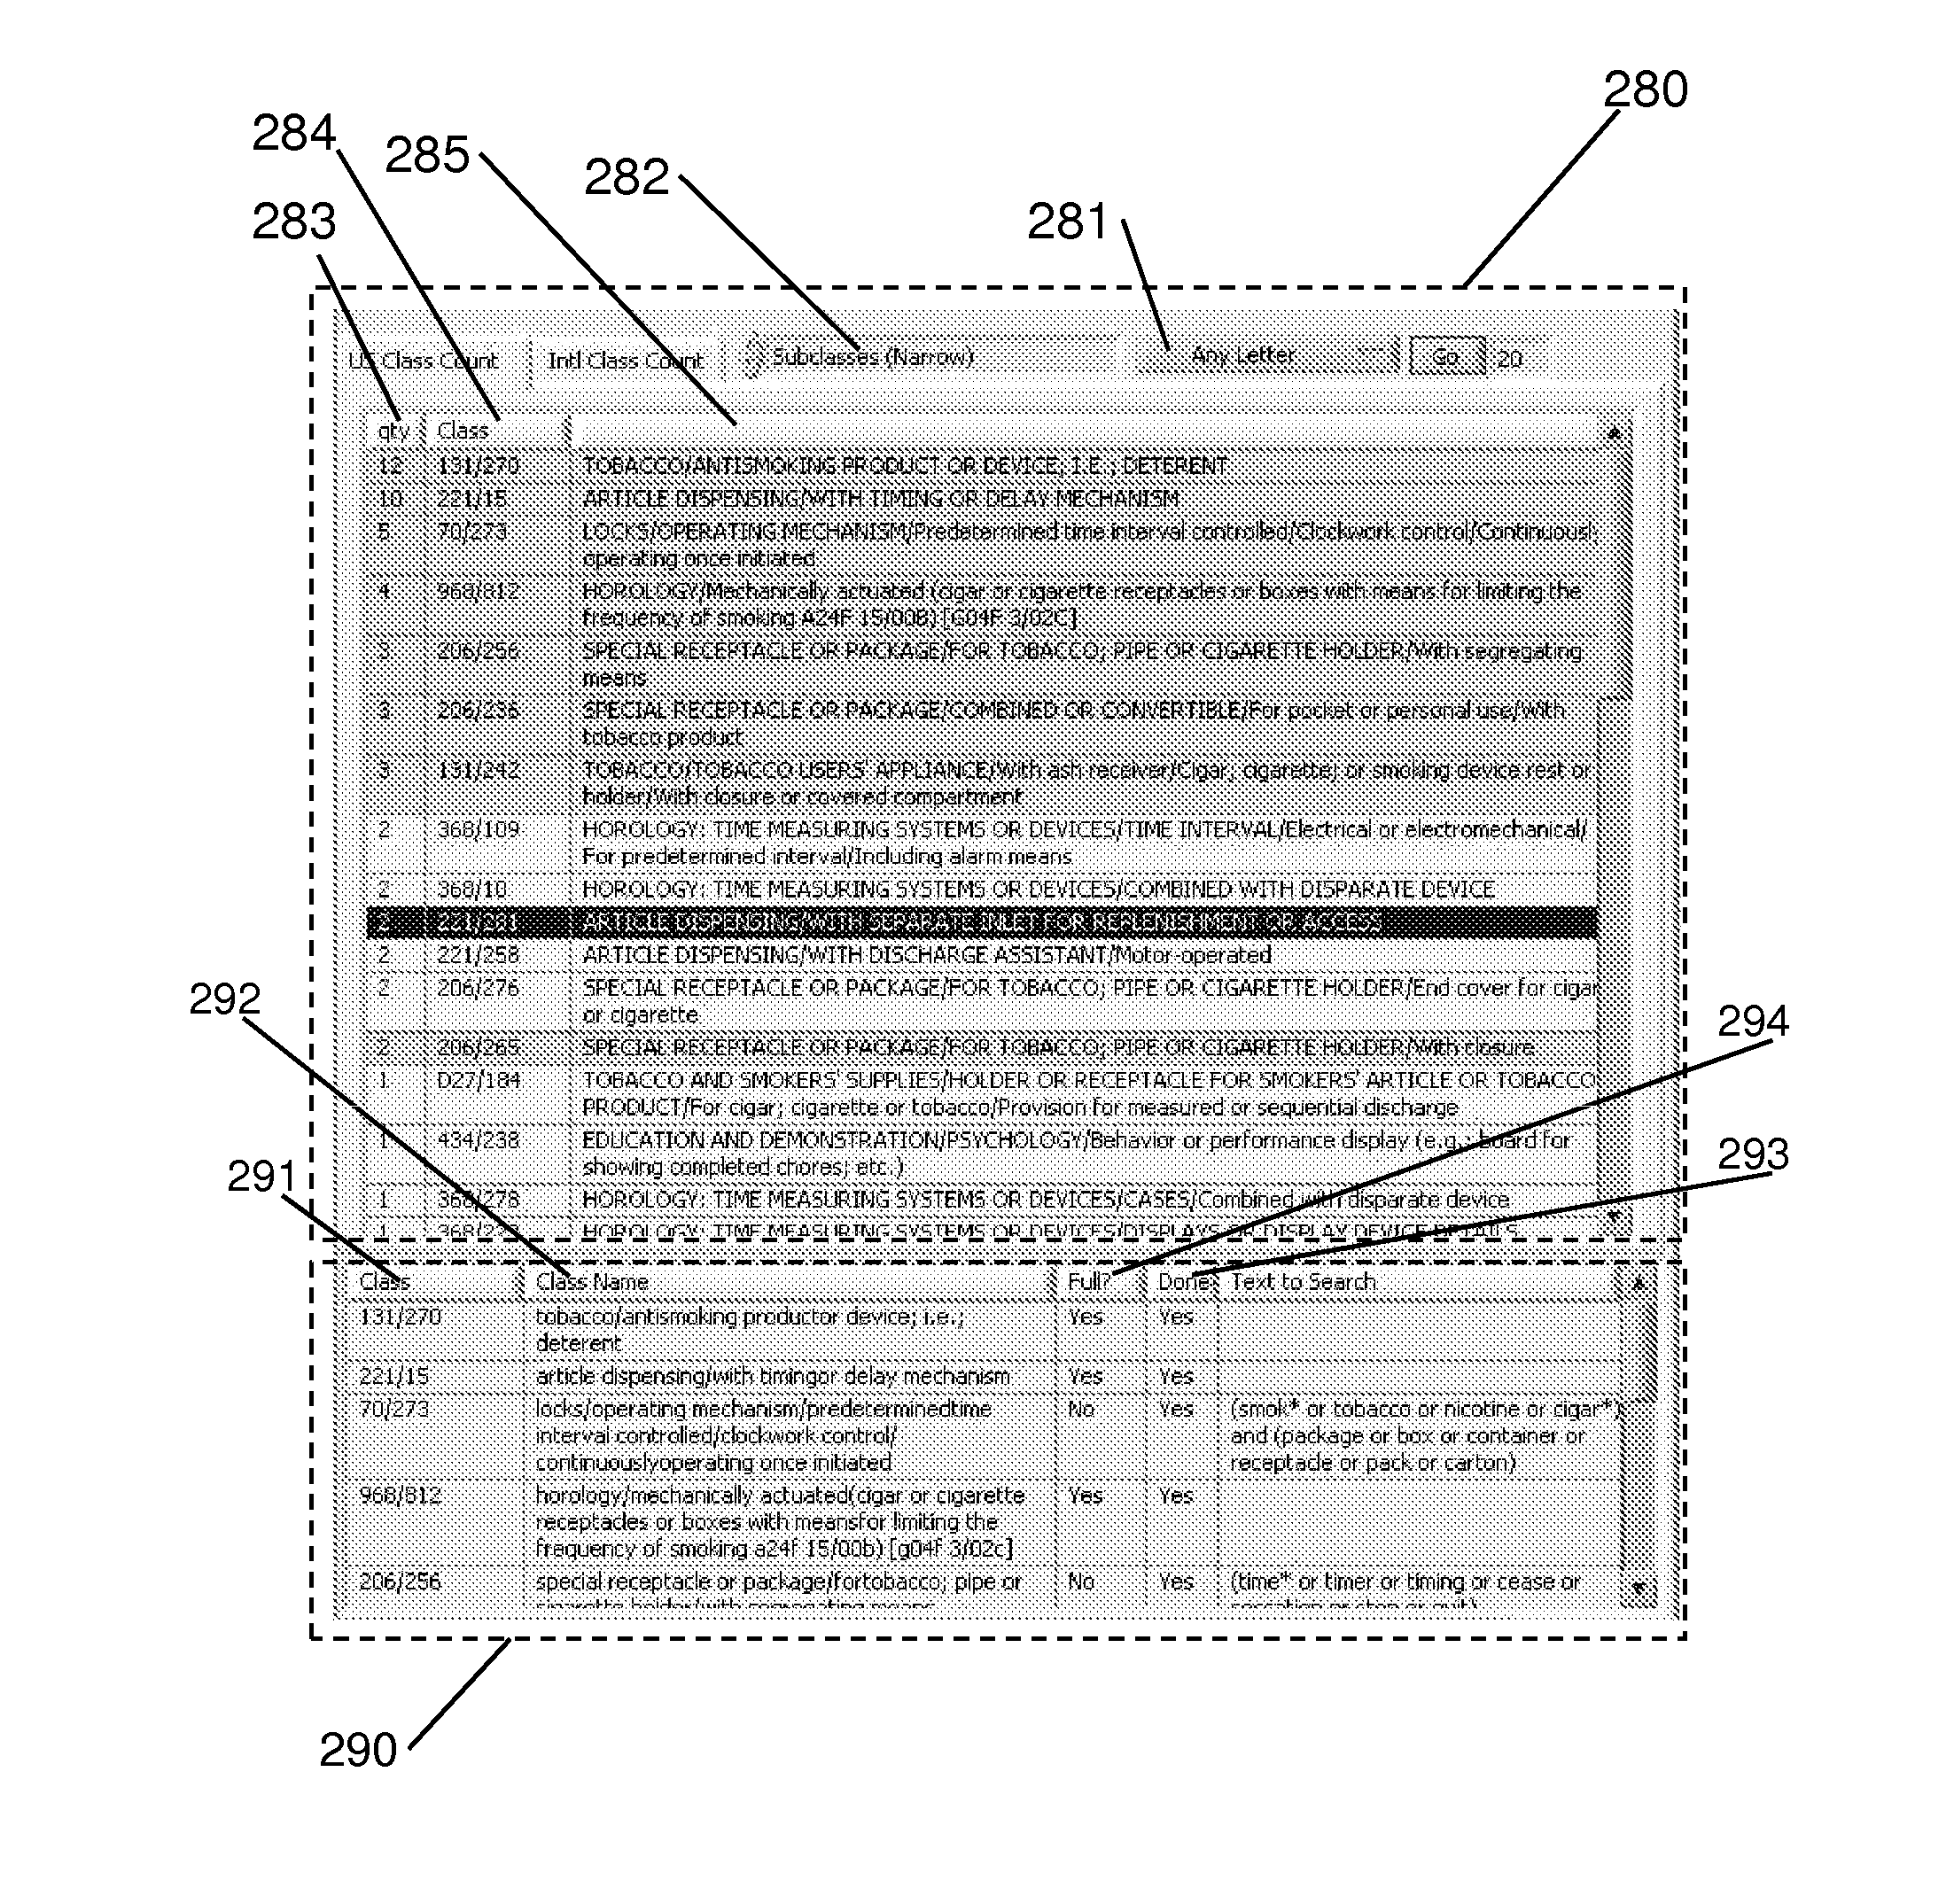 Method and system for document presentation and analysis